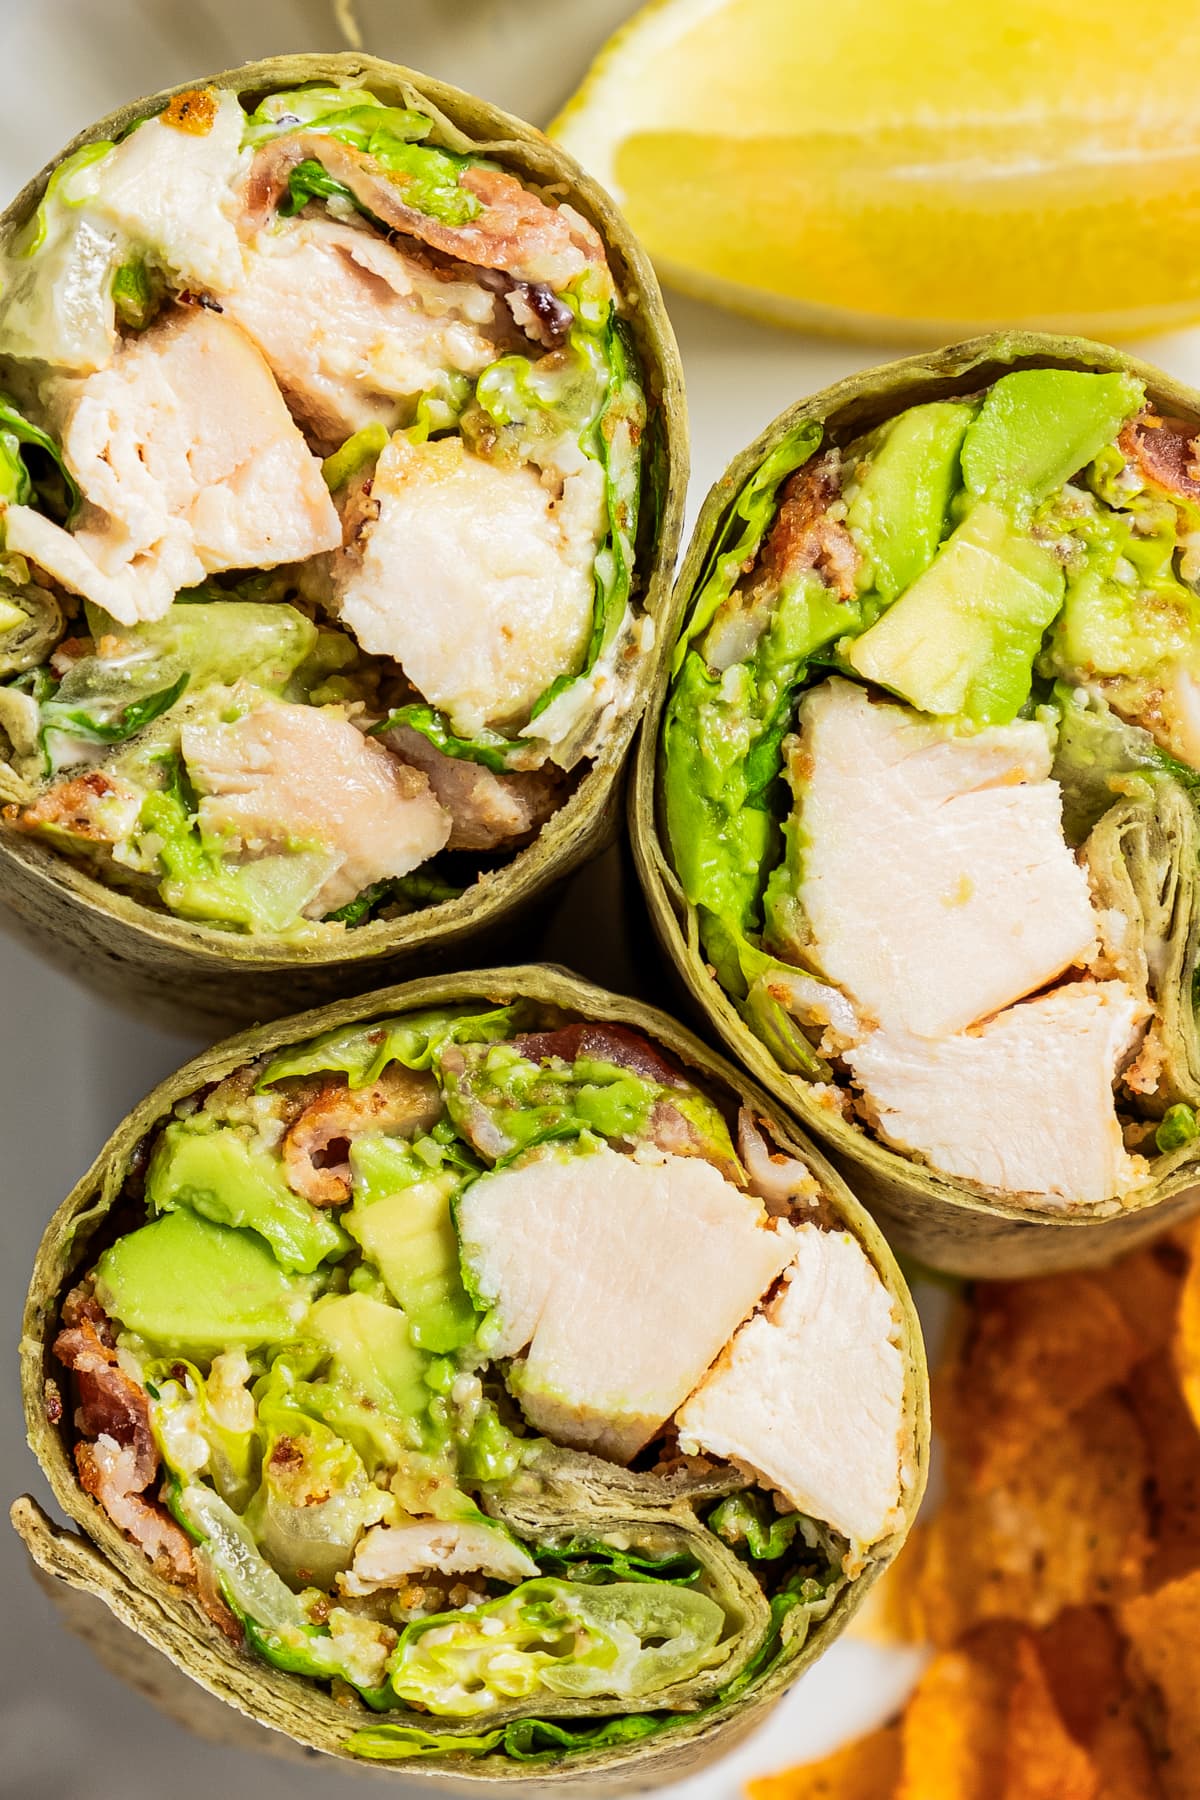 Three chicken wraps cut in half with the filling exposed to view the ingredients inside the wrap.